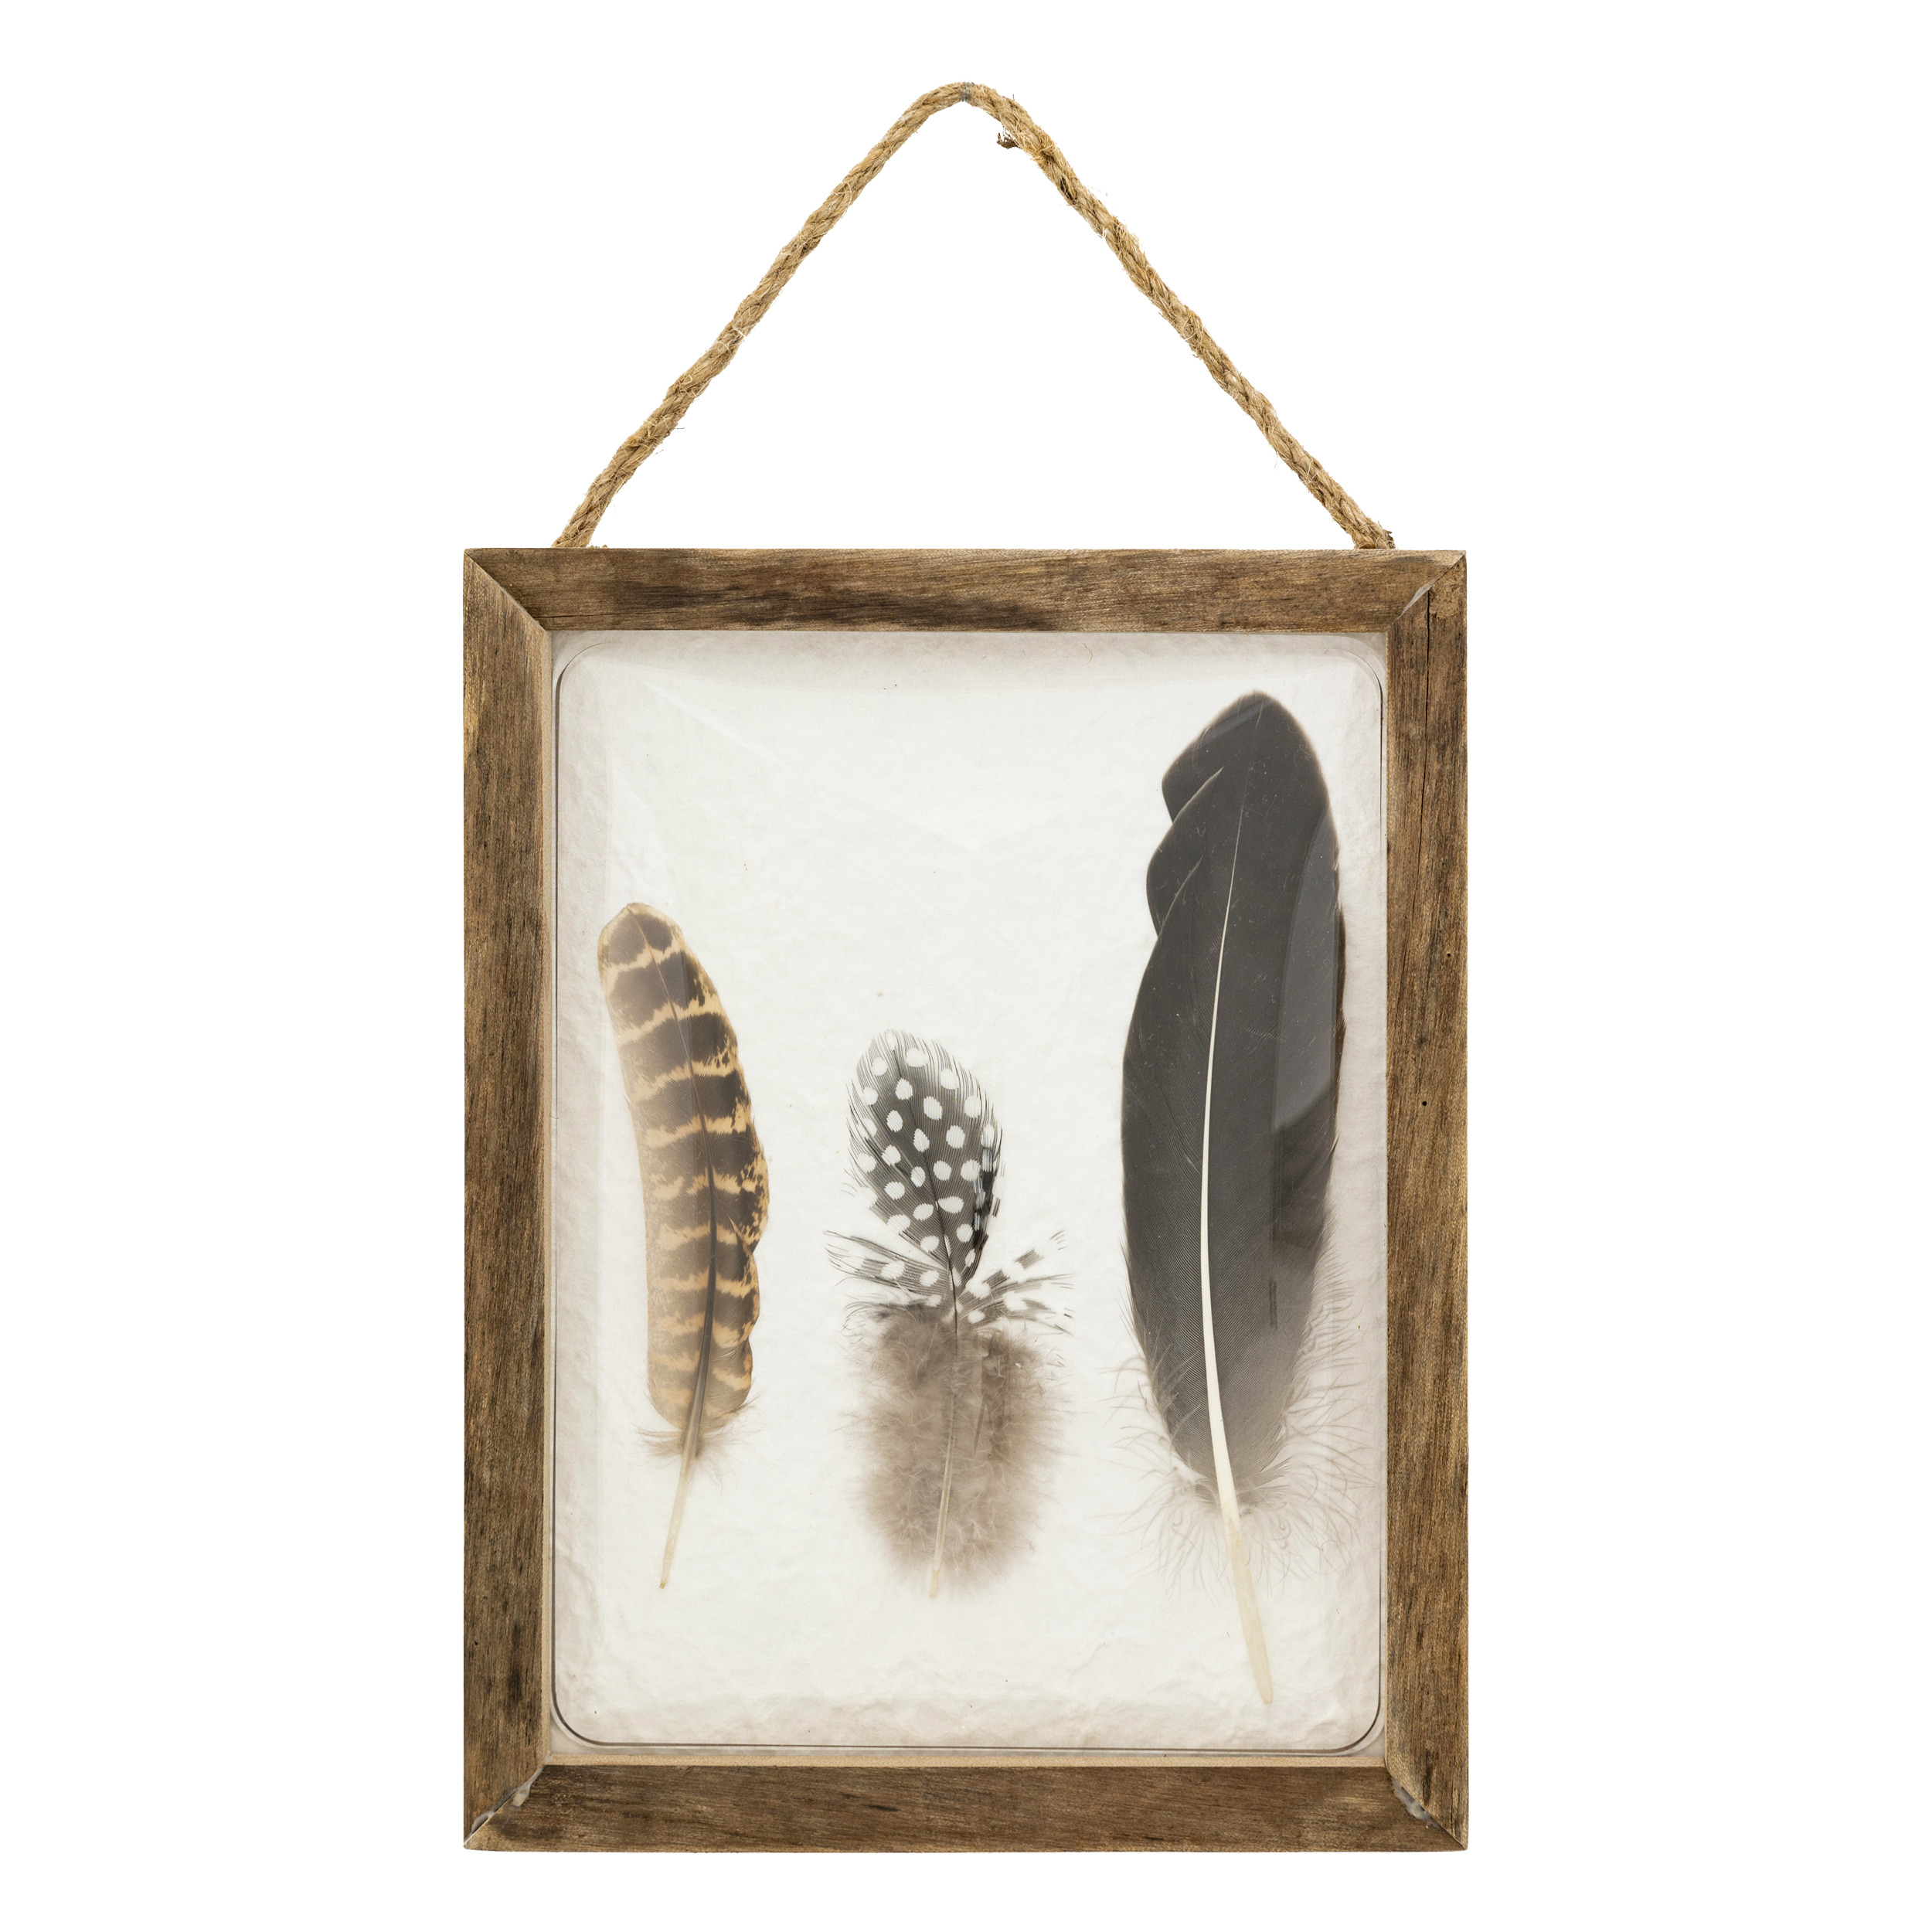 Aw24 Jonas 20 X 25 Cm Wall Decoration With Feathers Gift